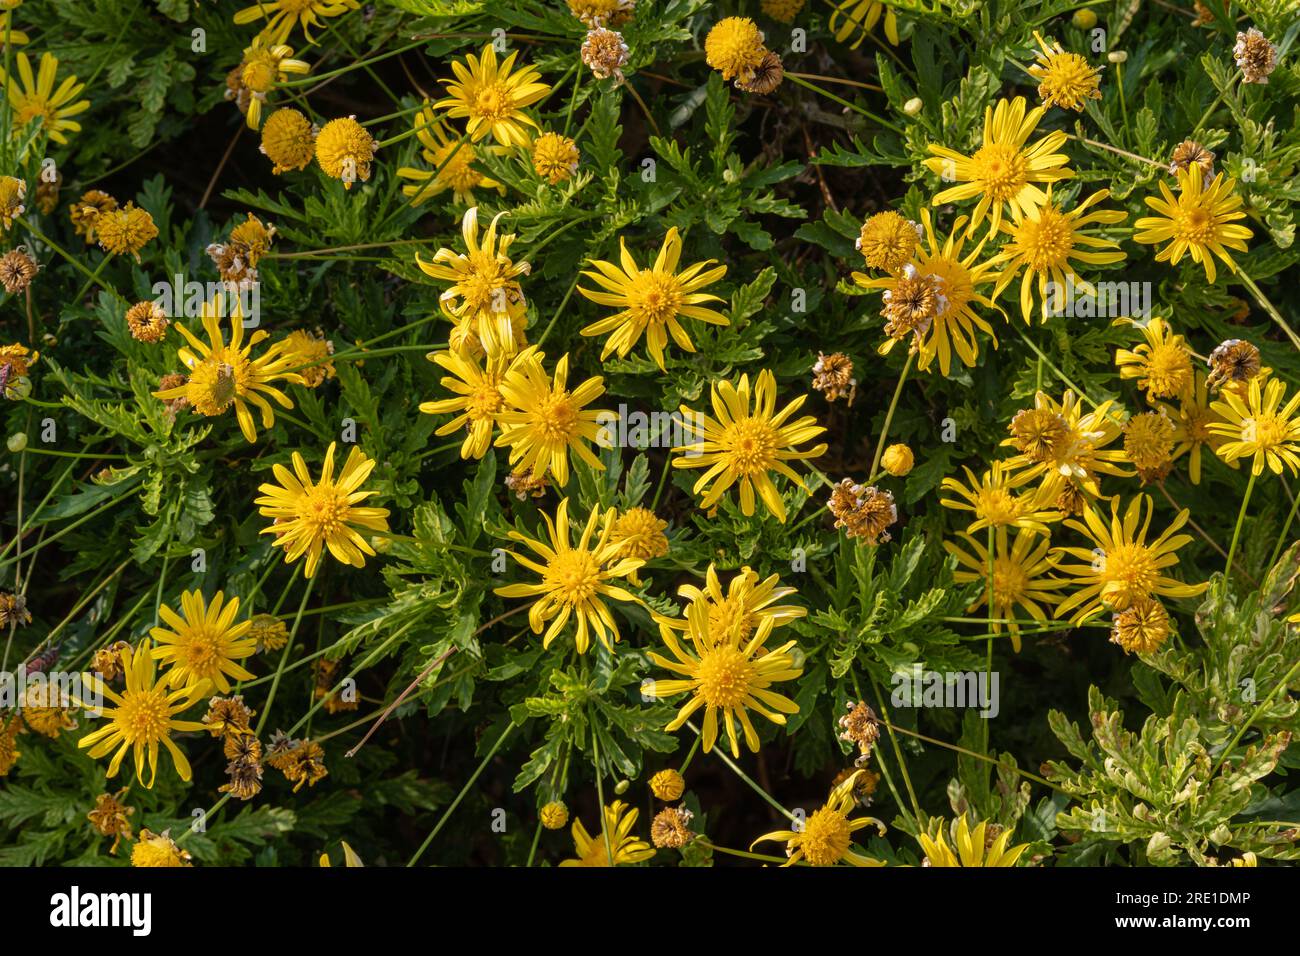 Closeup view of bright yellow flowers of euryops chrysanthemoides aka African bush daisy or bull's eye blooming in garden in outdoor sunlight Stock Photo